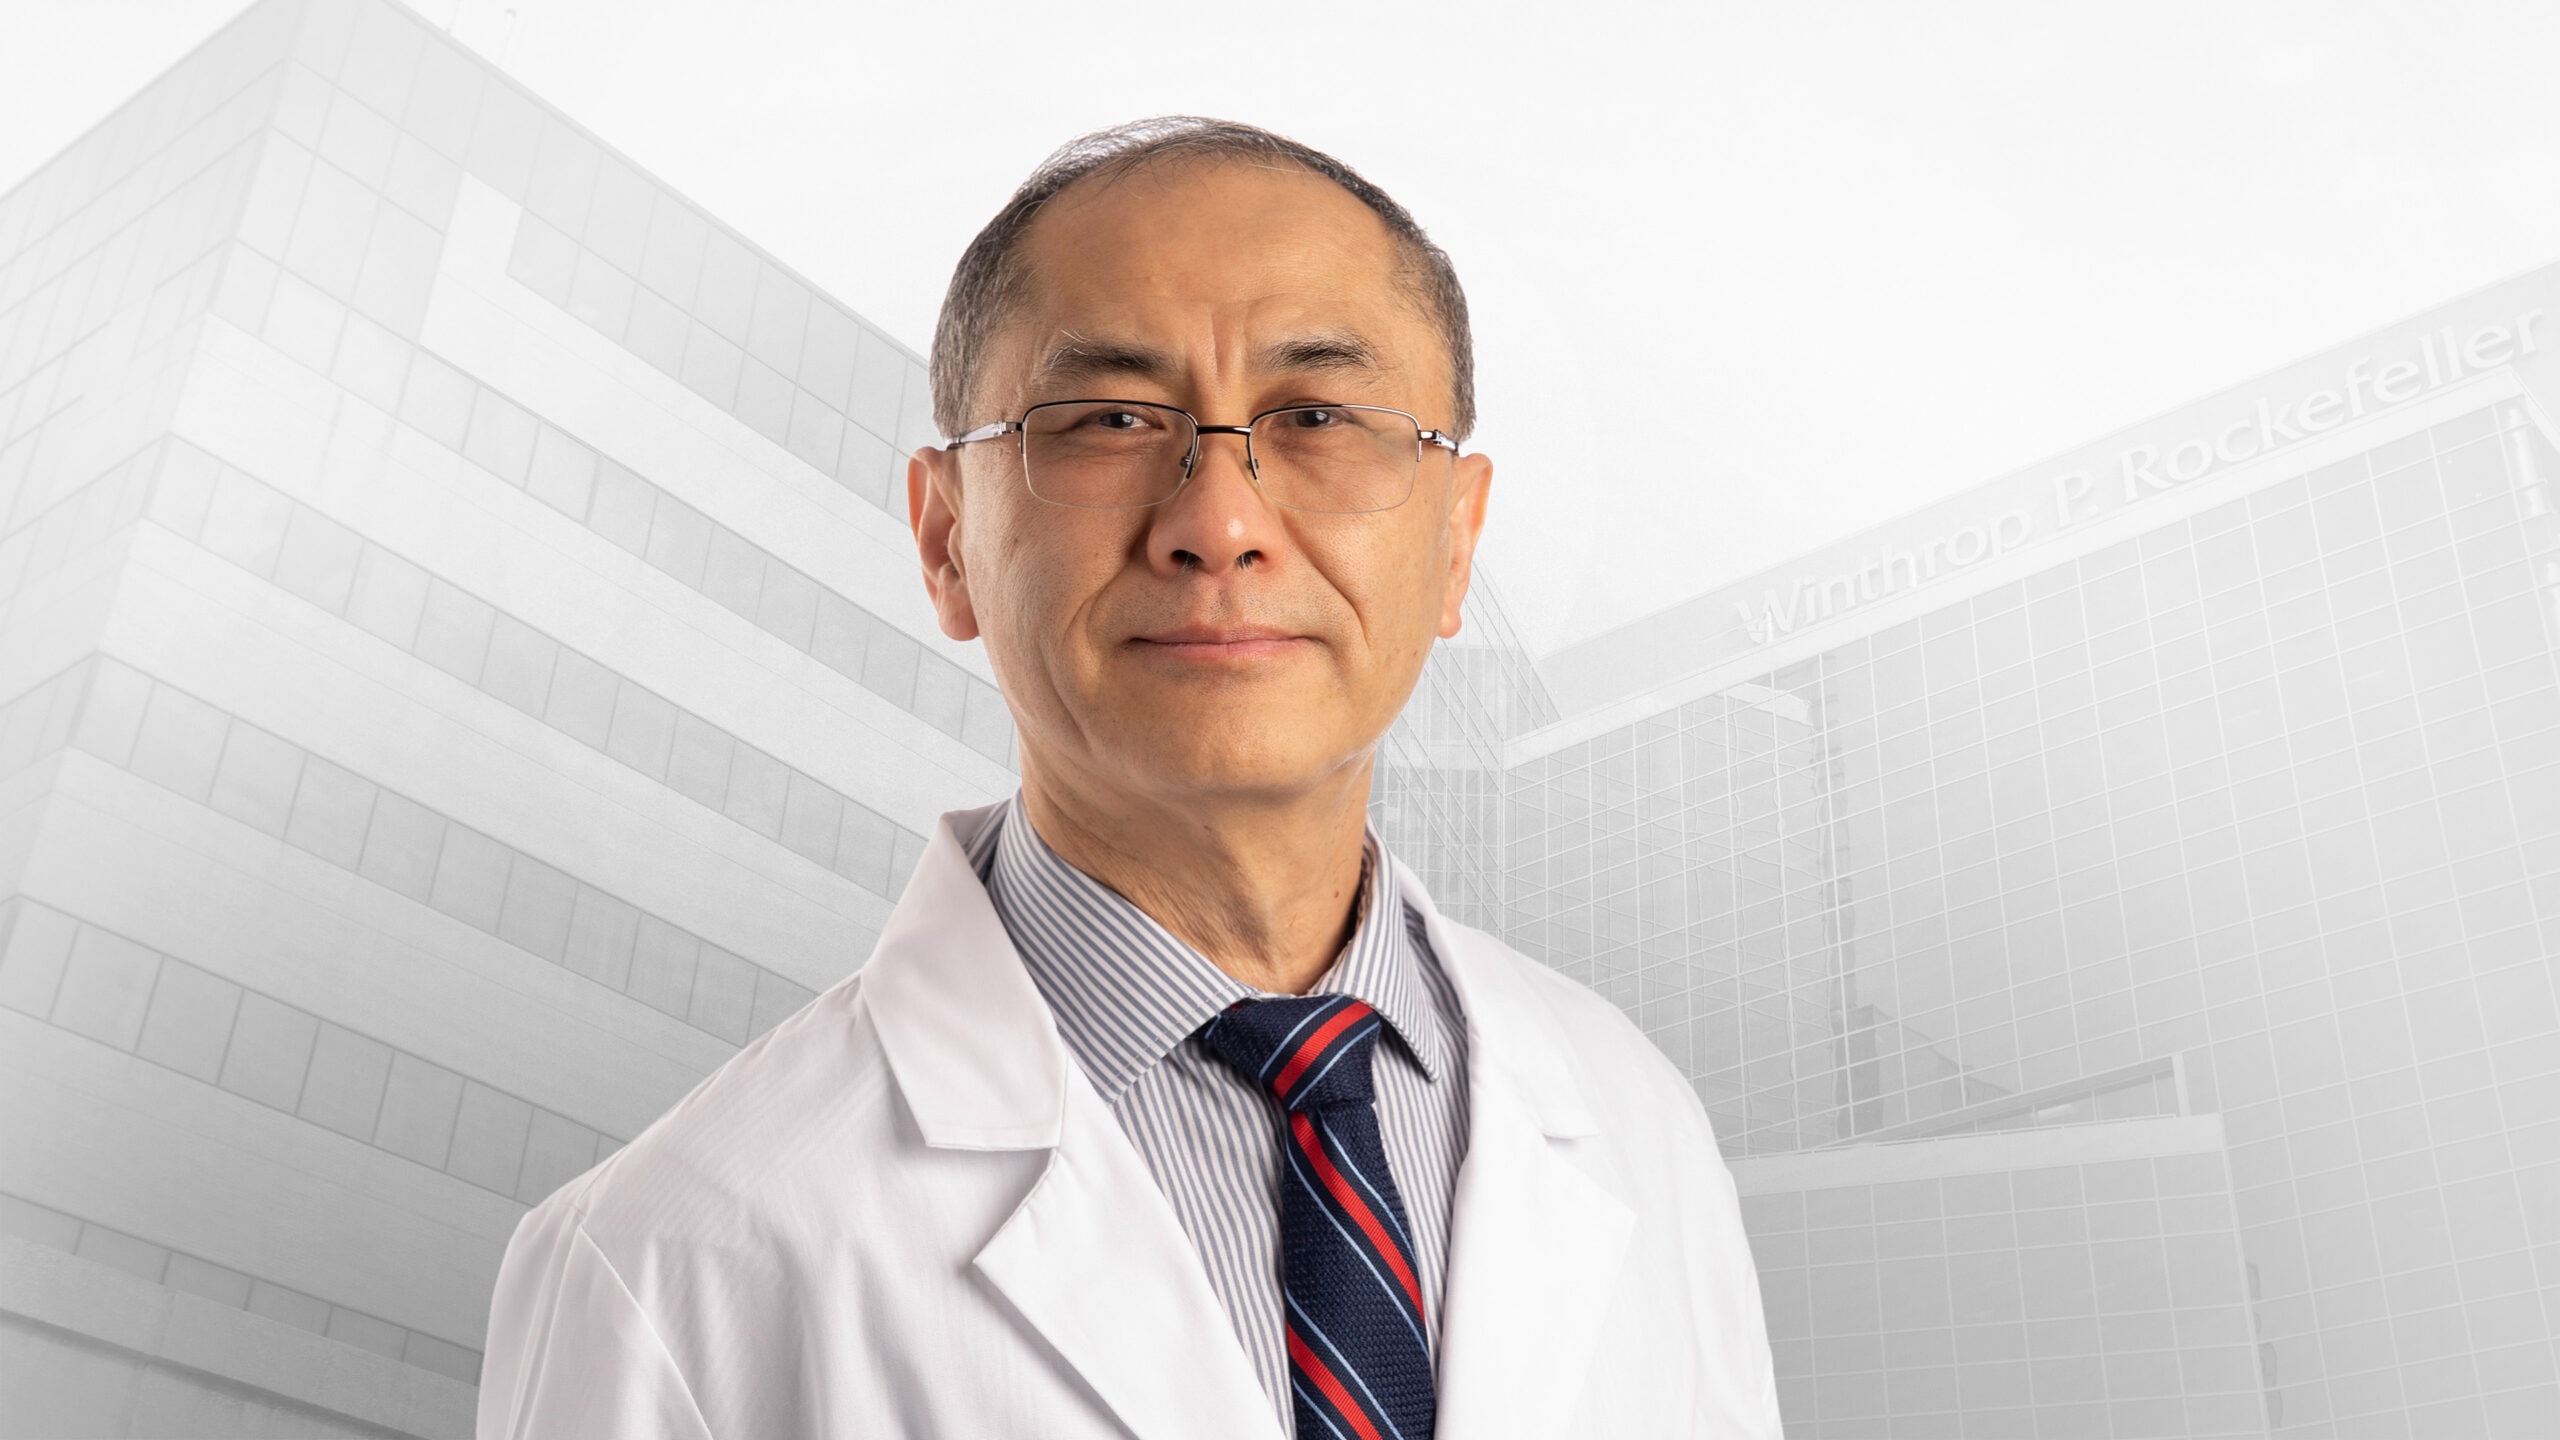 Shi-Ming Tu, M.D., has joined the UAMS Winthrop P. Rockefeller Cancer Institute as a medical oncologist specializing in the treatment and research of genitourinary cancer.